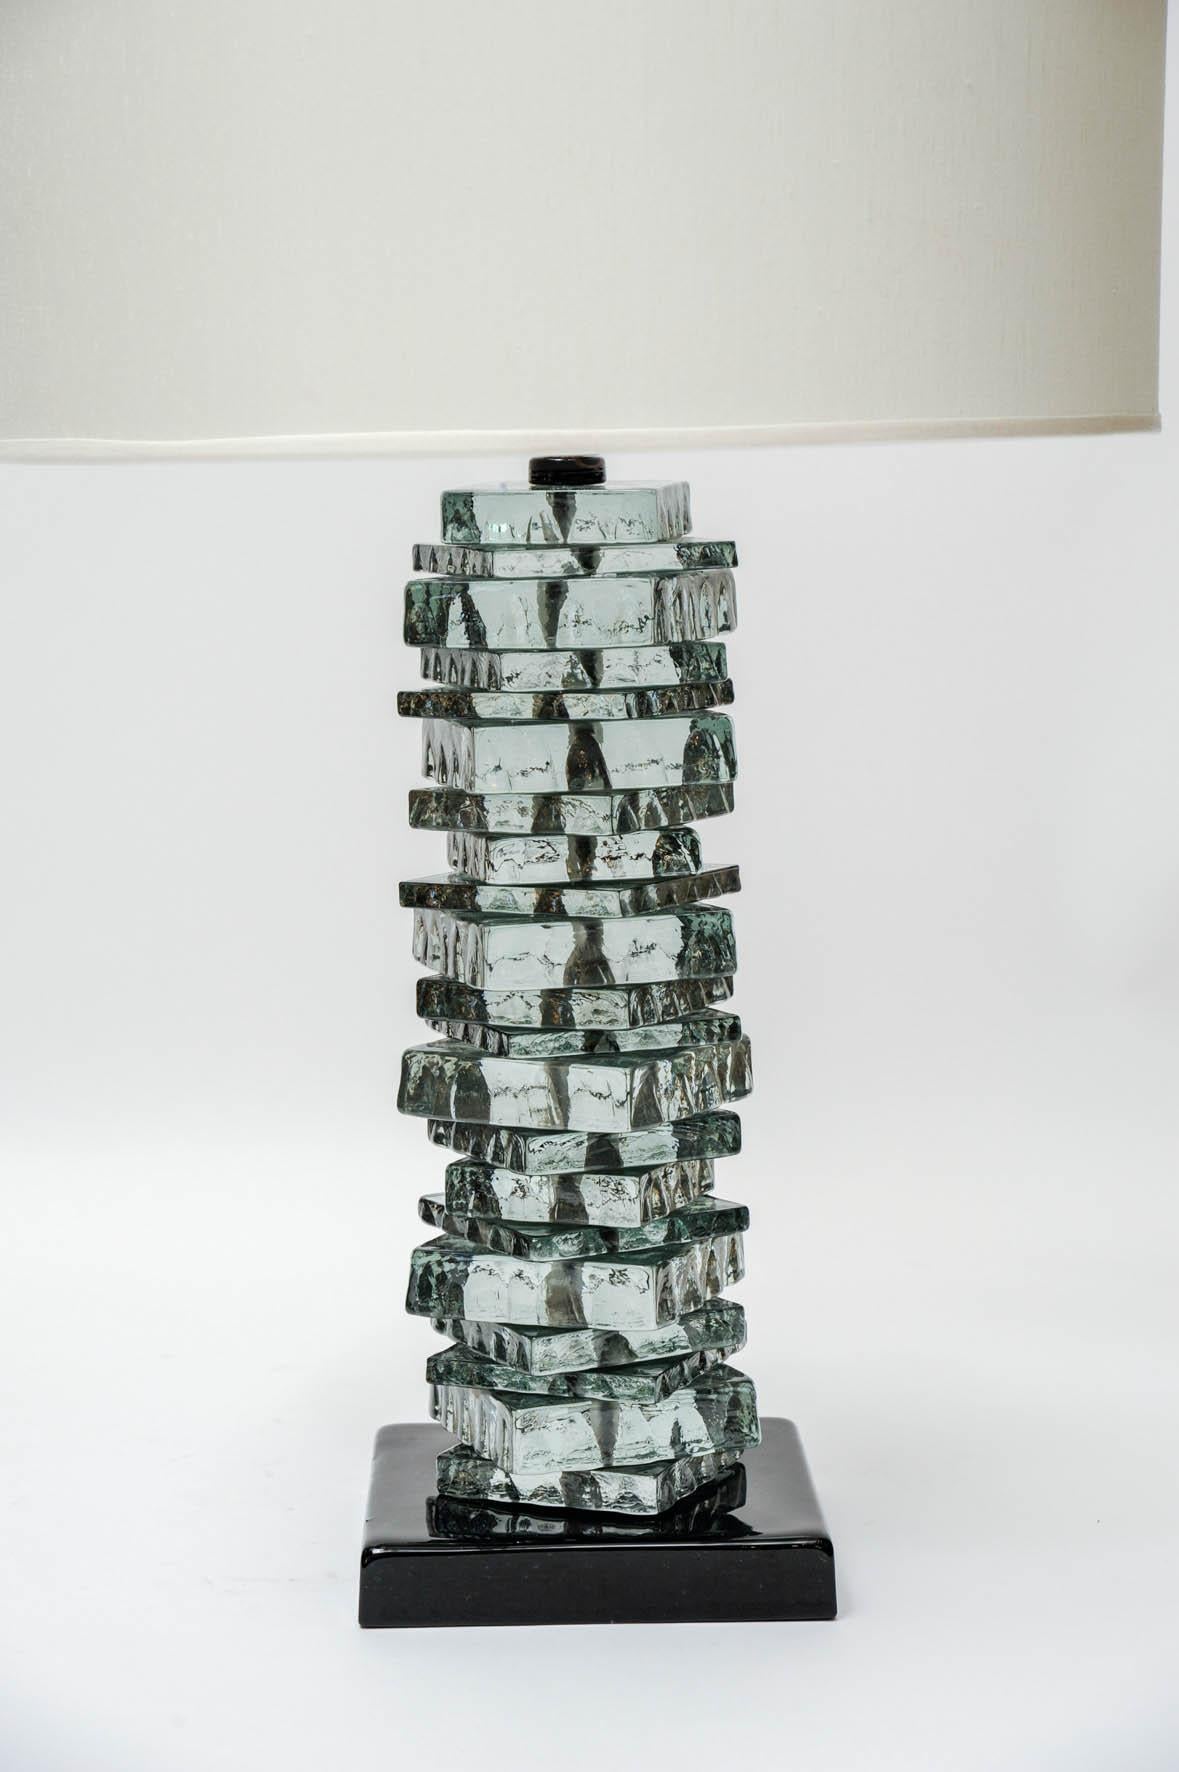 Pair of Murano glass table lamps made of a stack of square tiles with rough edges.